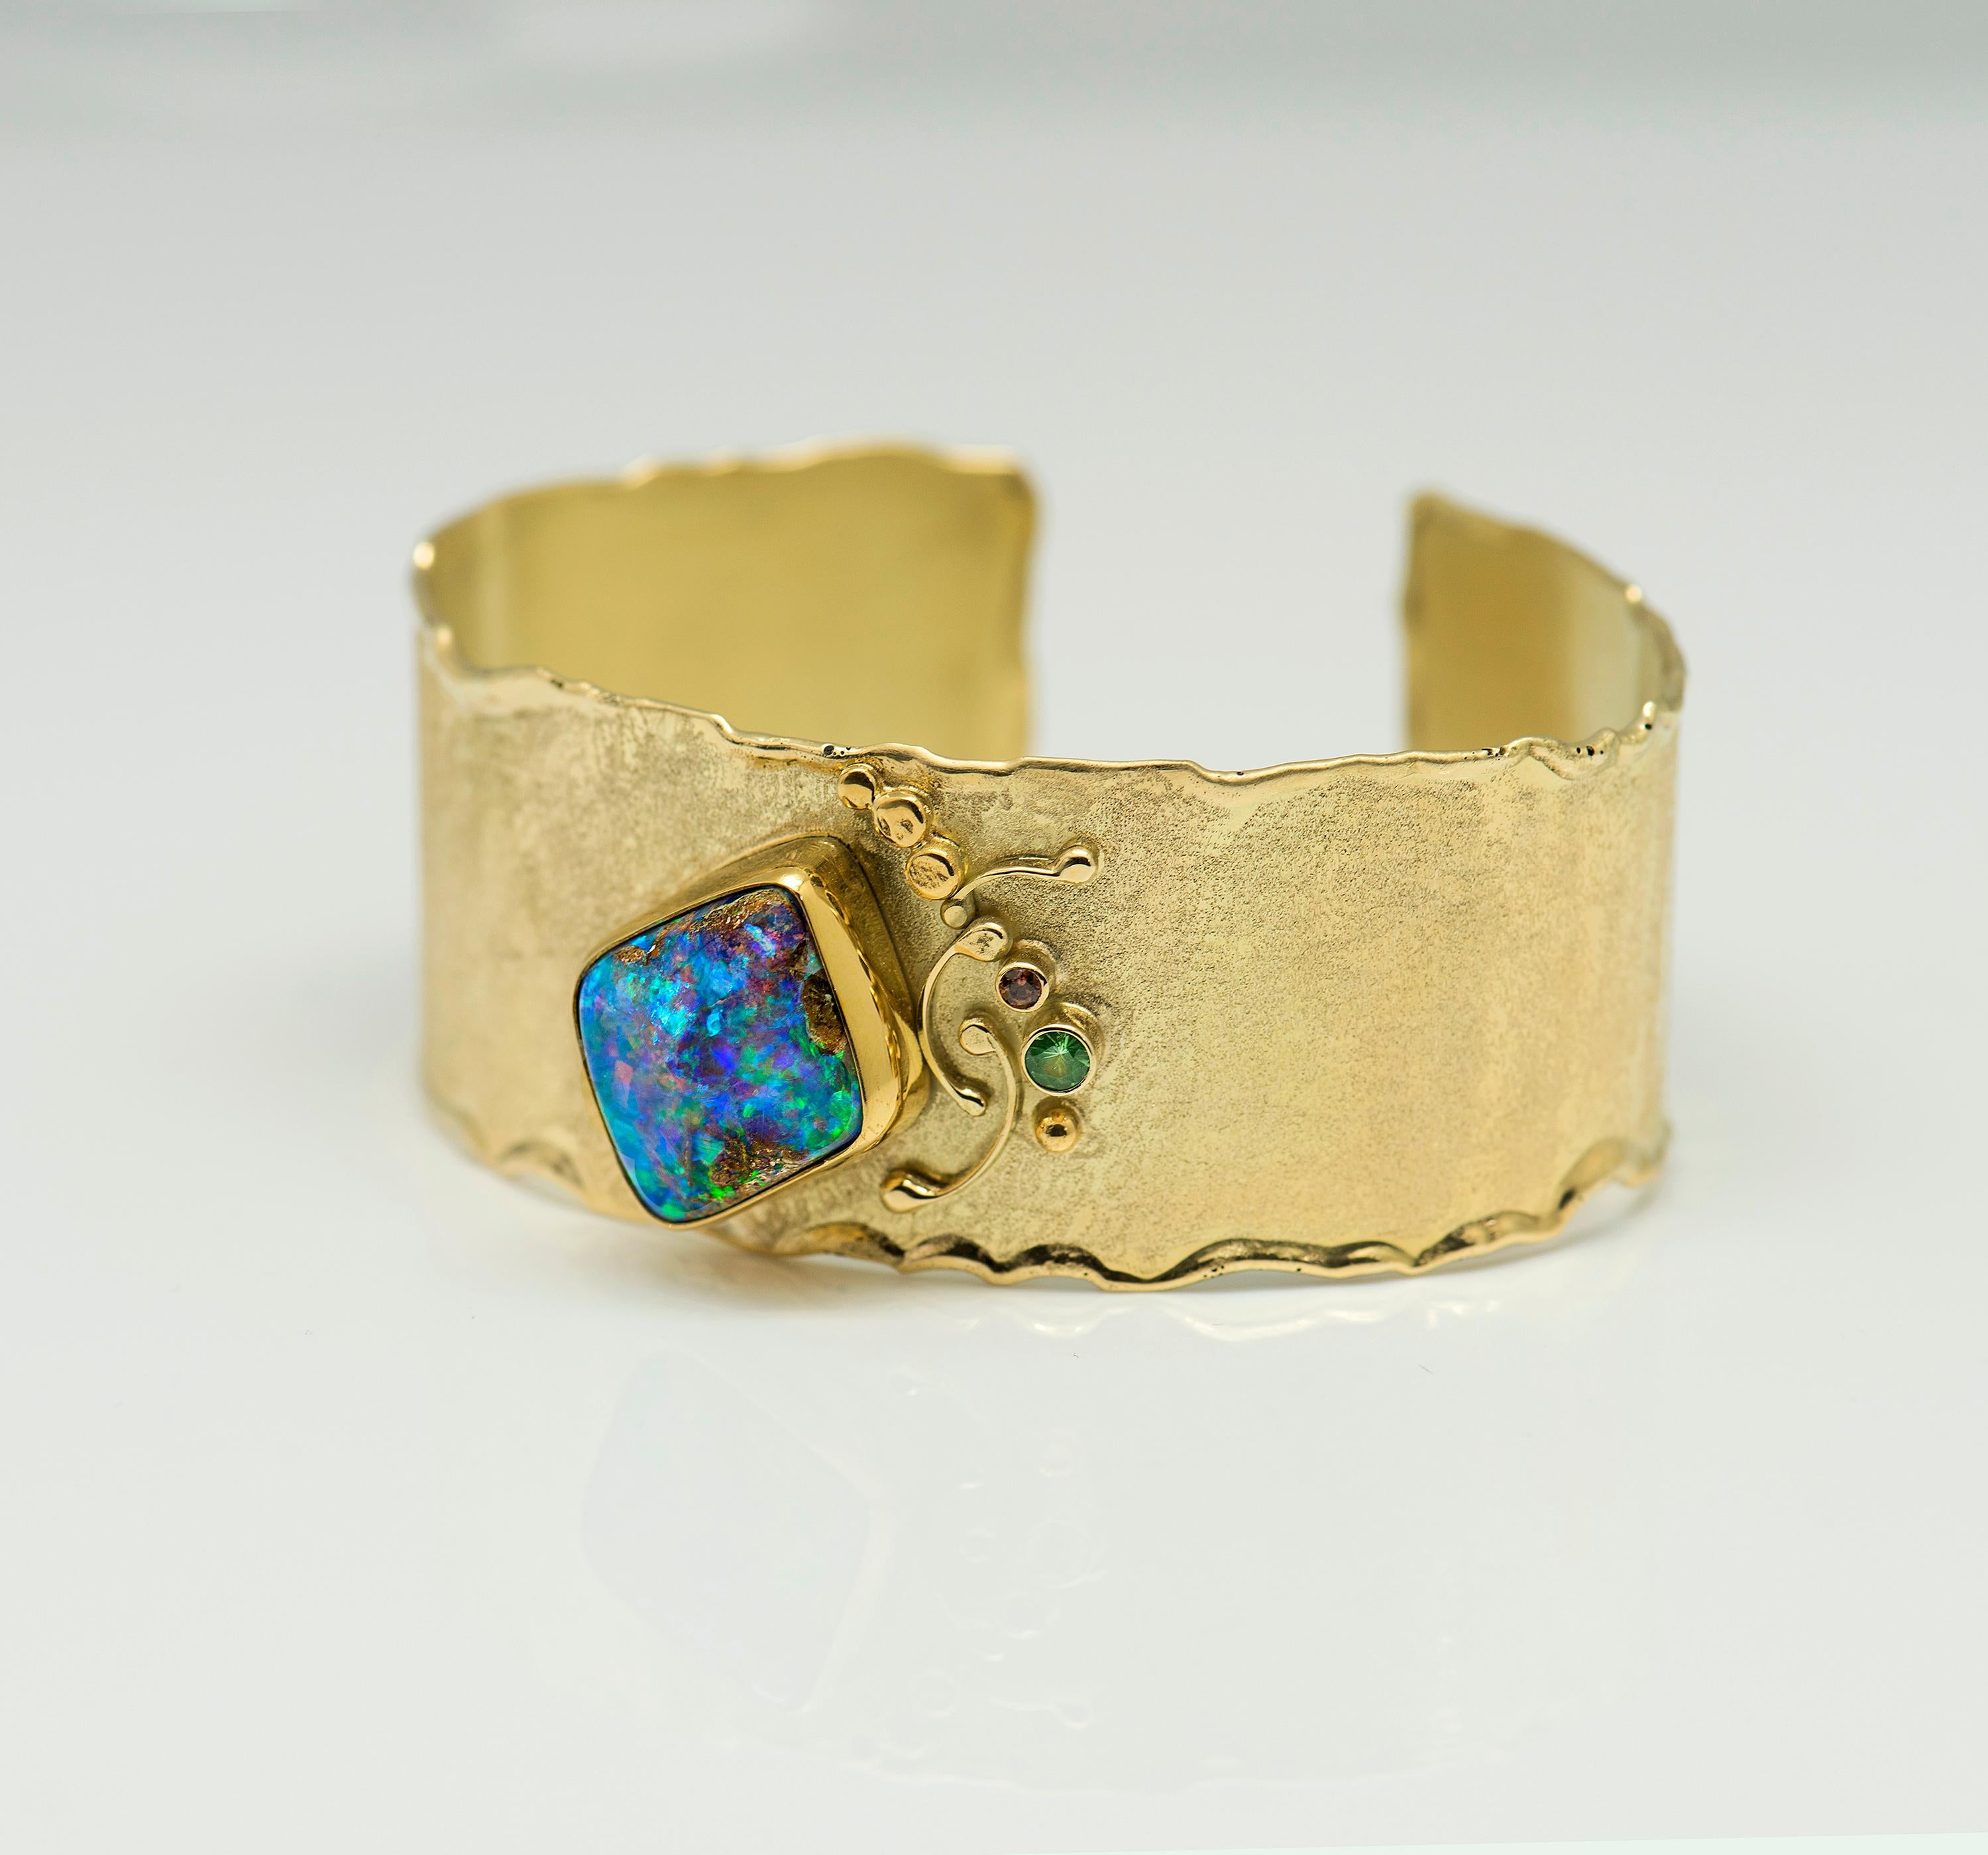   This Cuff is designed in 18k gold, the bezel around the opal is 22k gold.  The Cuff can be sized, it's a large currently, but can be sized to your preference.  The color tones in the opal are beautiful blues, greens and a periwinkle hue.  Opalized